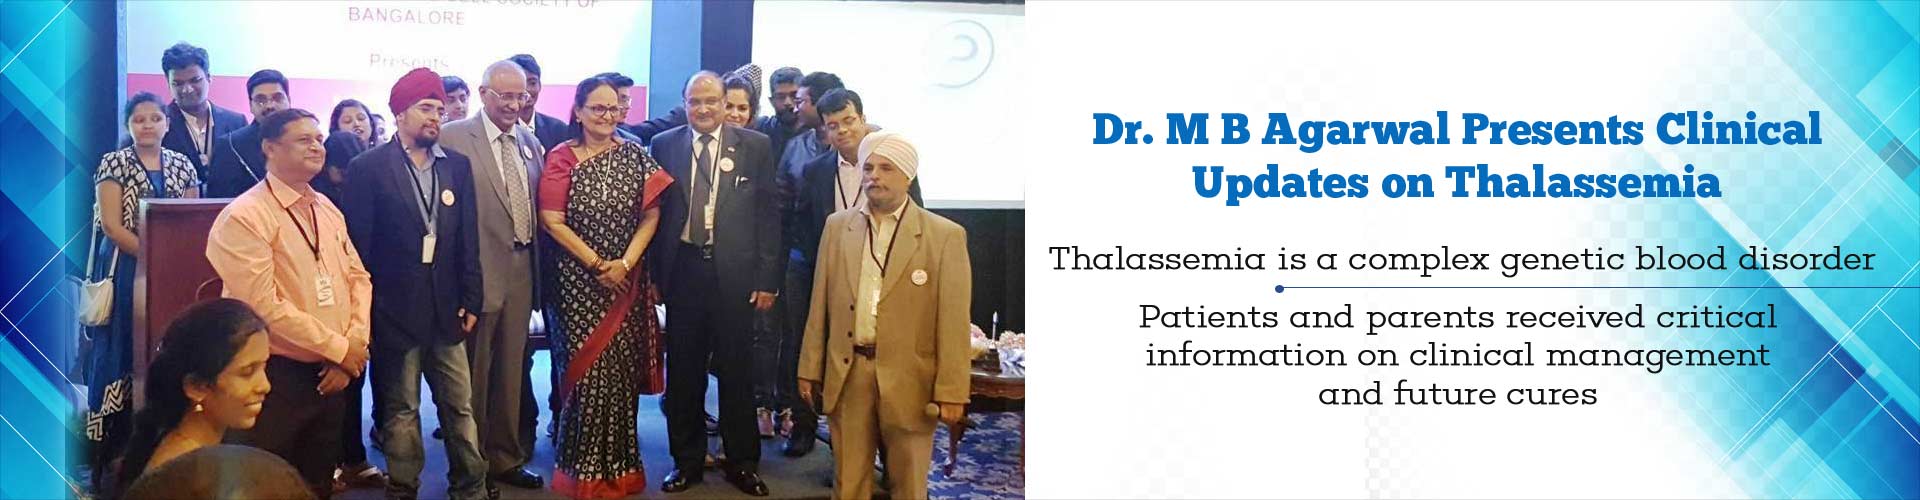 Dr. M B Agarwal Presents Clinical Updates on Thalassemia
- Thalassemia is a complex genetic blood disorder
- Patients and parents received critical information on clinical managment and future cures